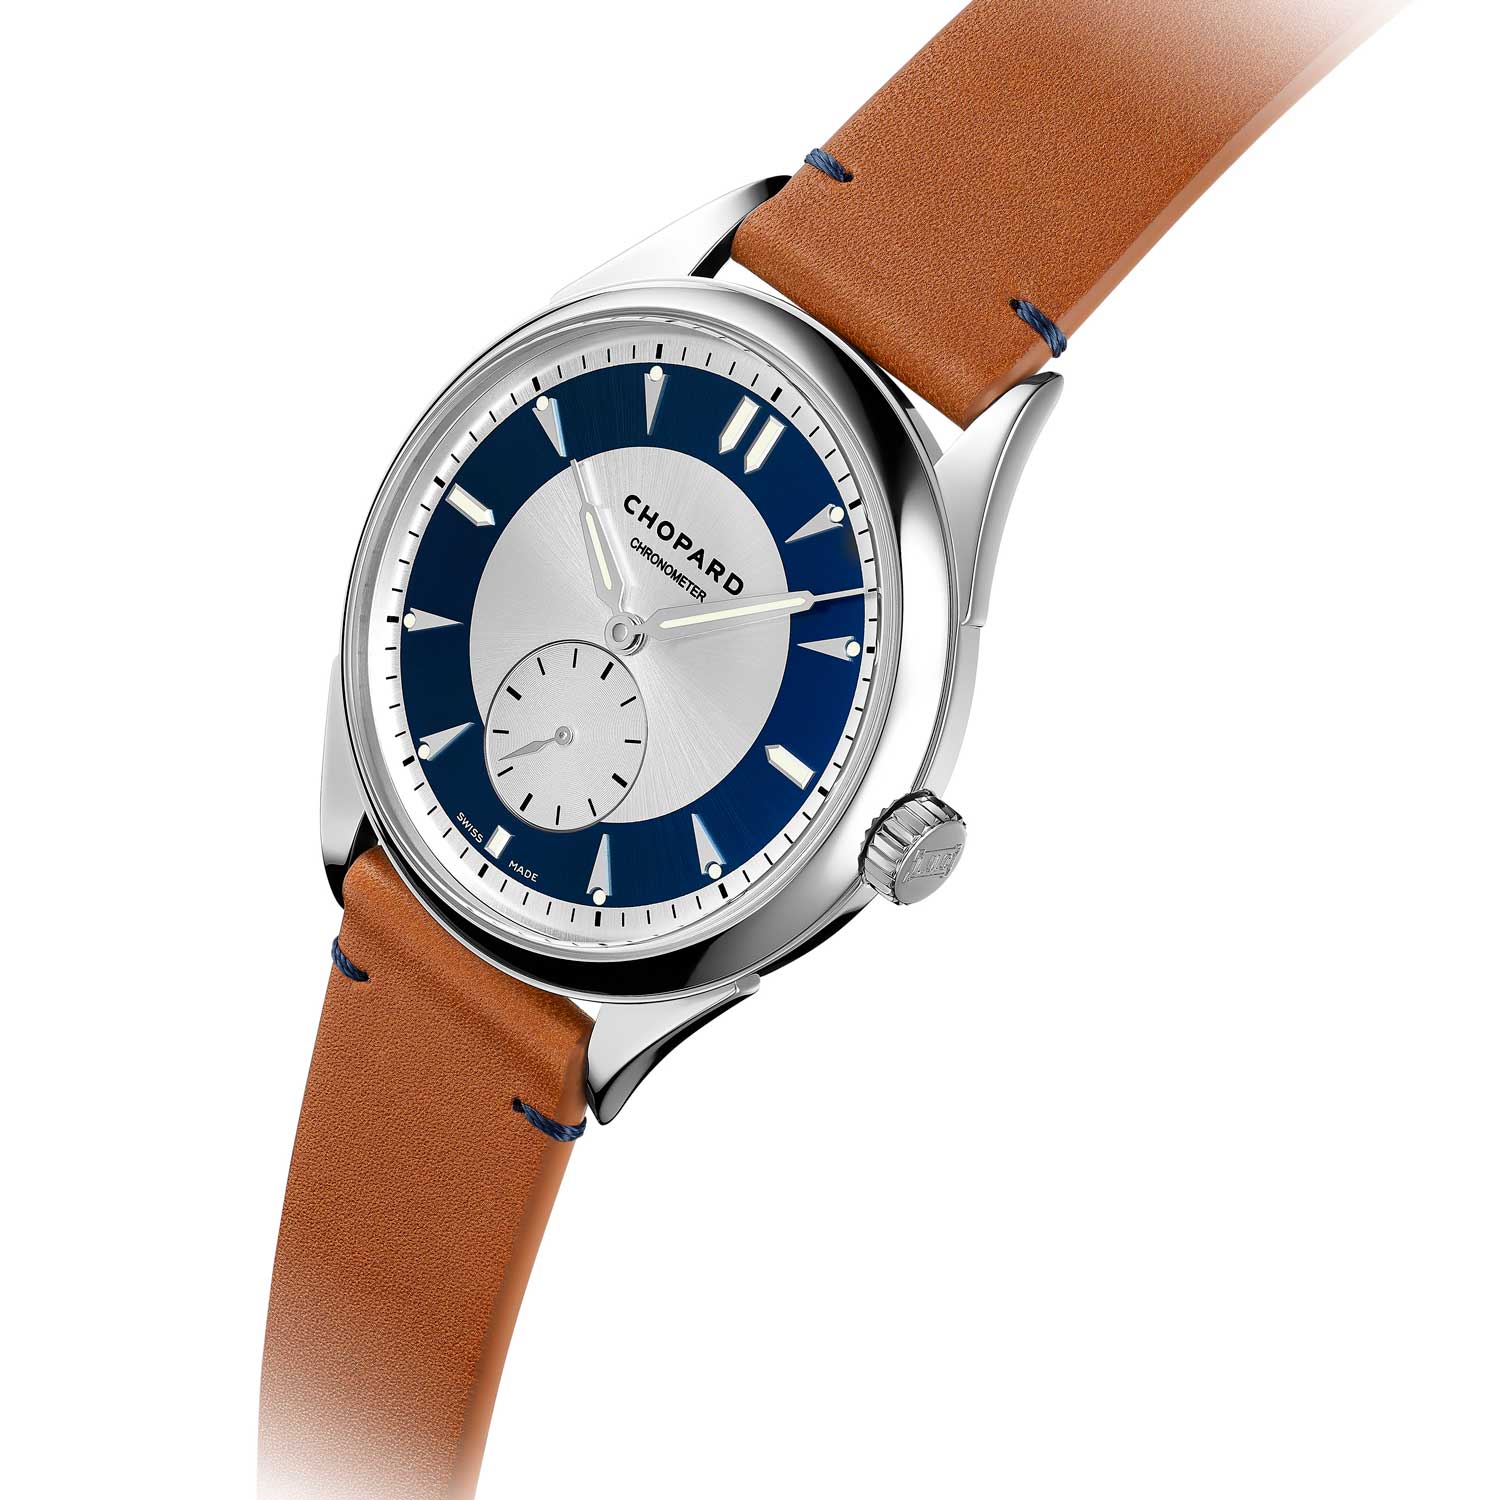 L.U.C QF Jubilee – Ref. 168613-3001: in stainless steel; numbered 25-piece limited edition